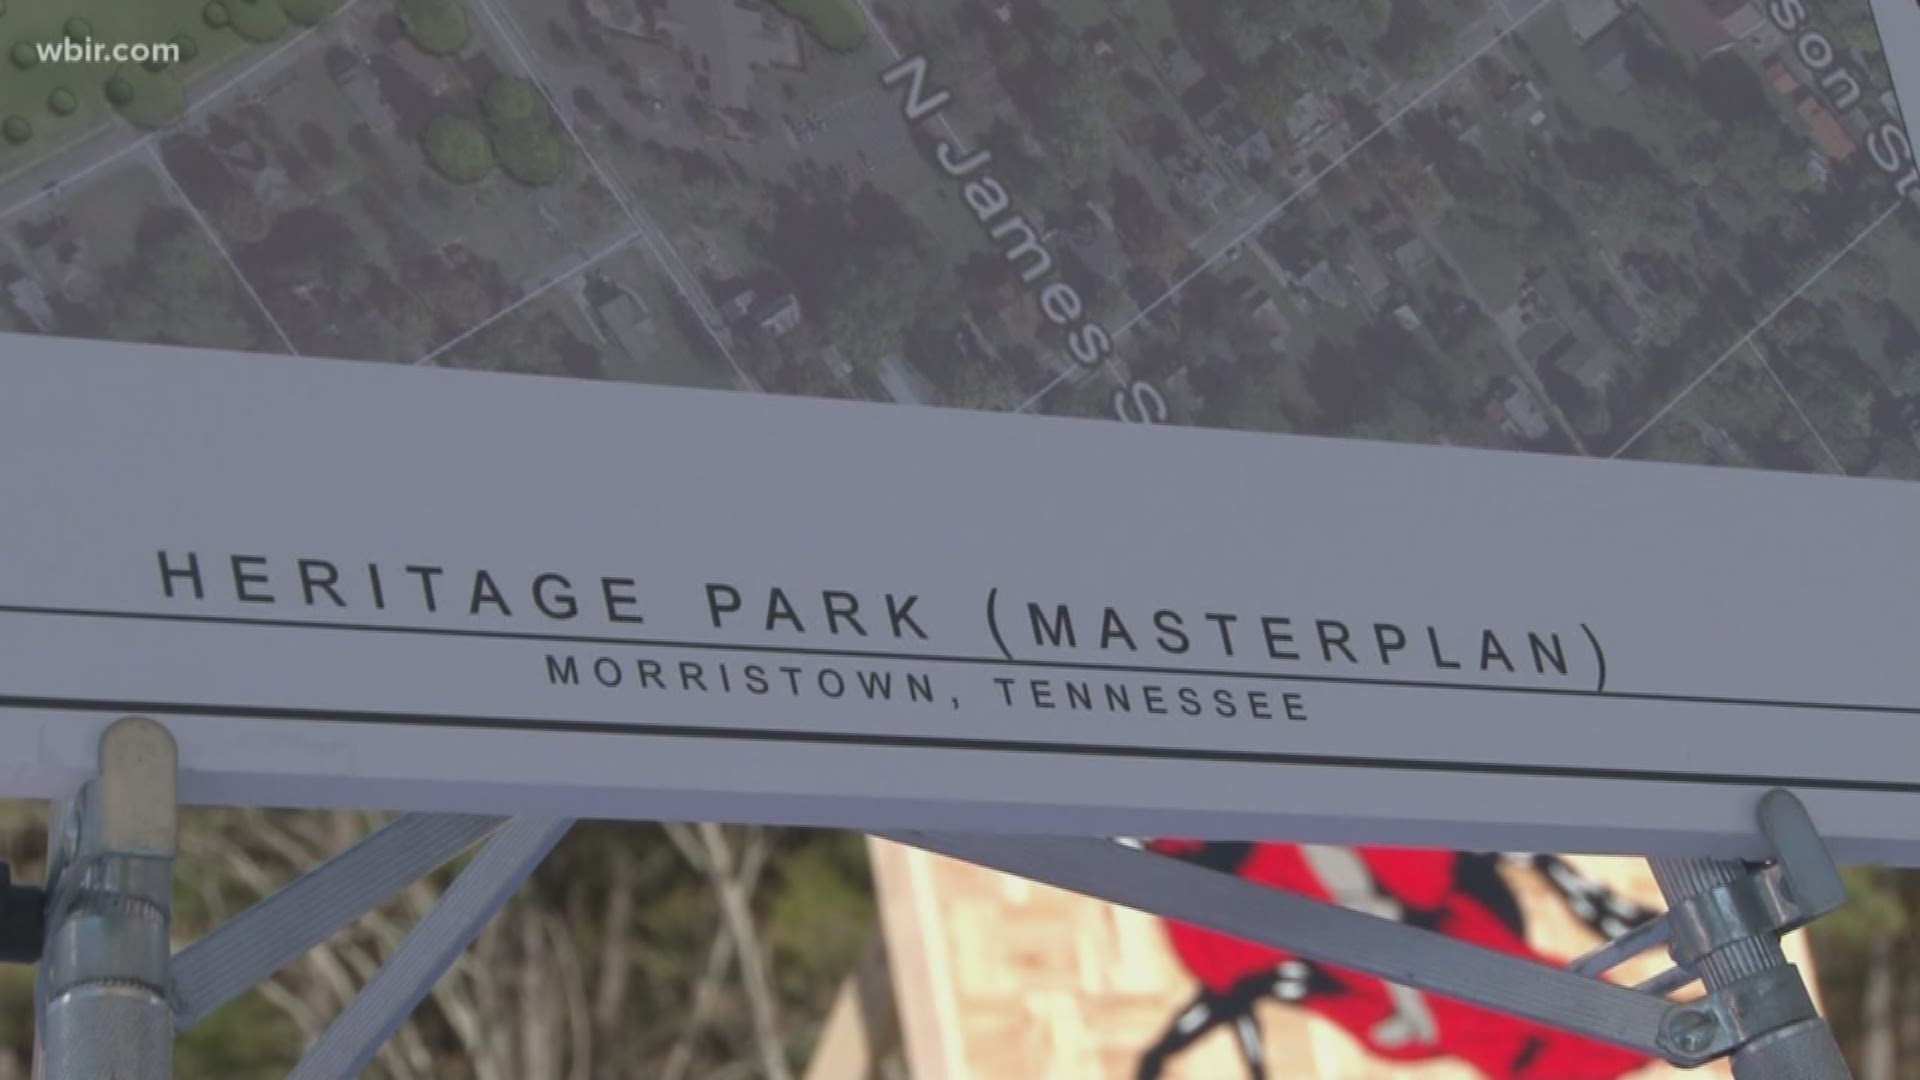 The 52-acre park sits where Morristown College once stood. Alumni and supporters officially opened the park Saturday.